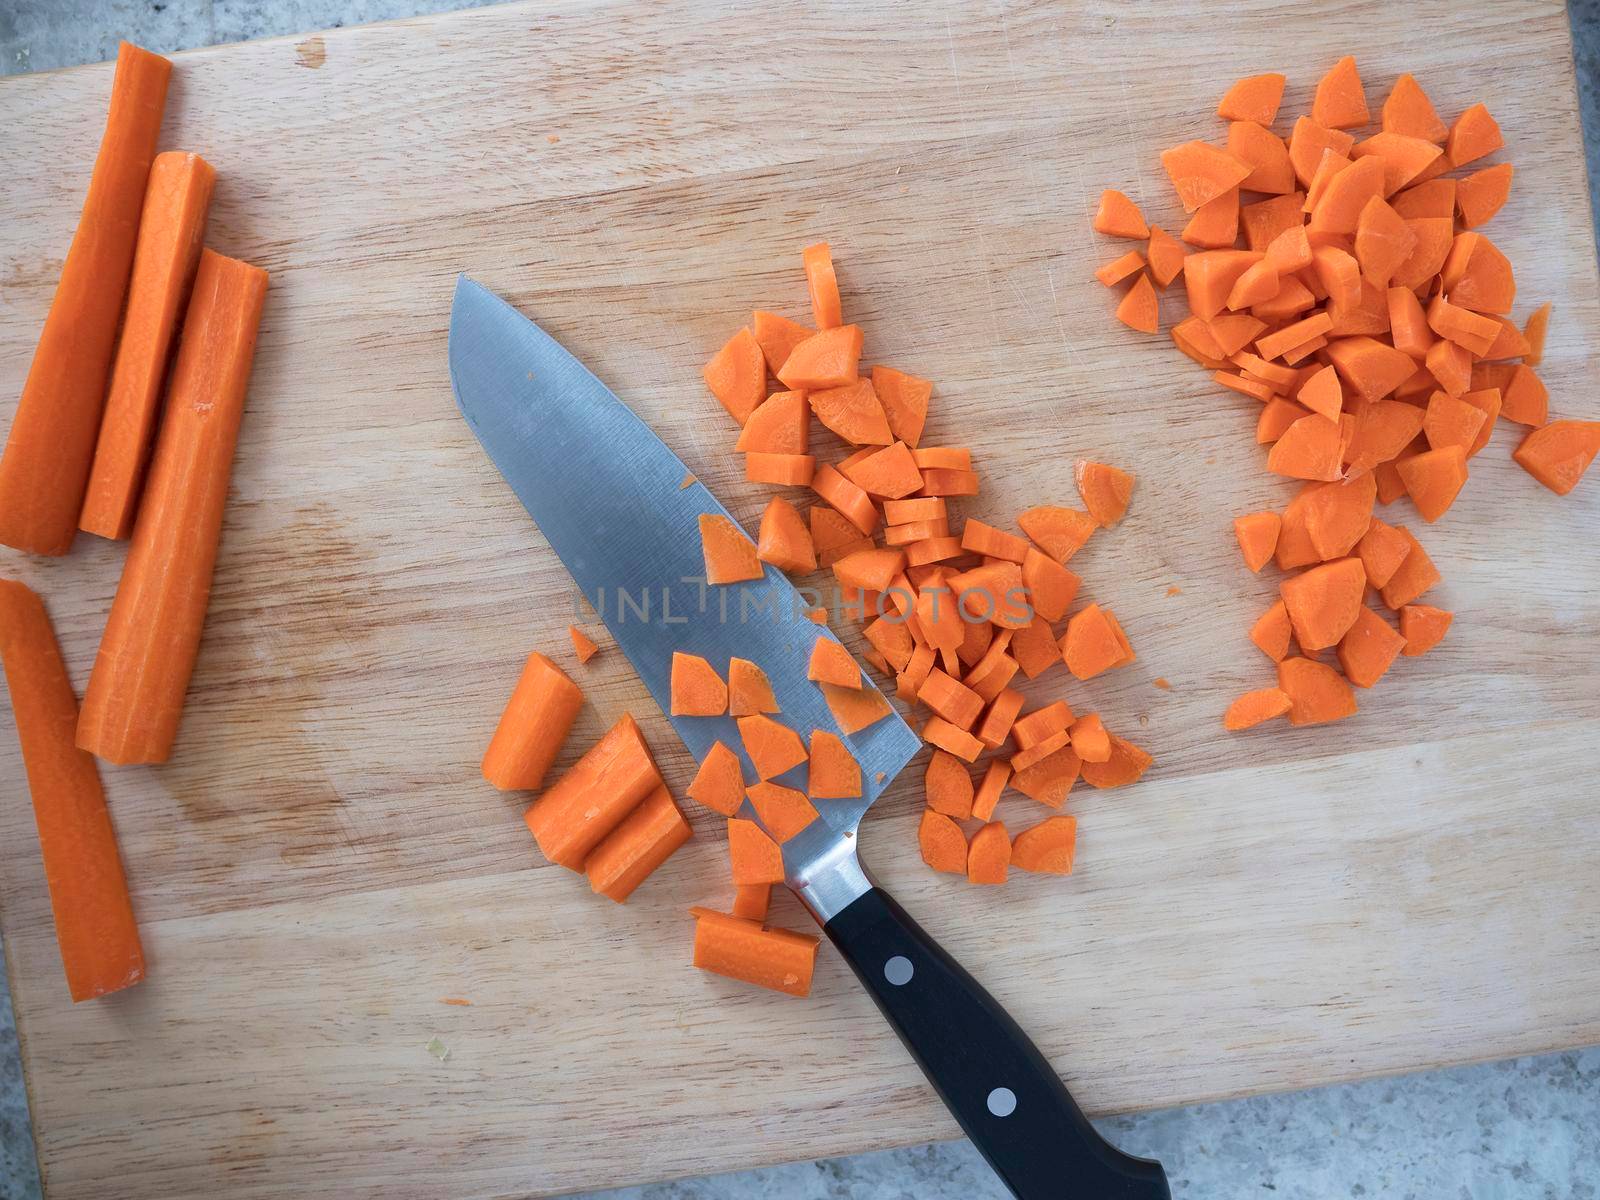 Carrot sticks and chopped carrots on cutting board with knife.